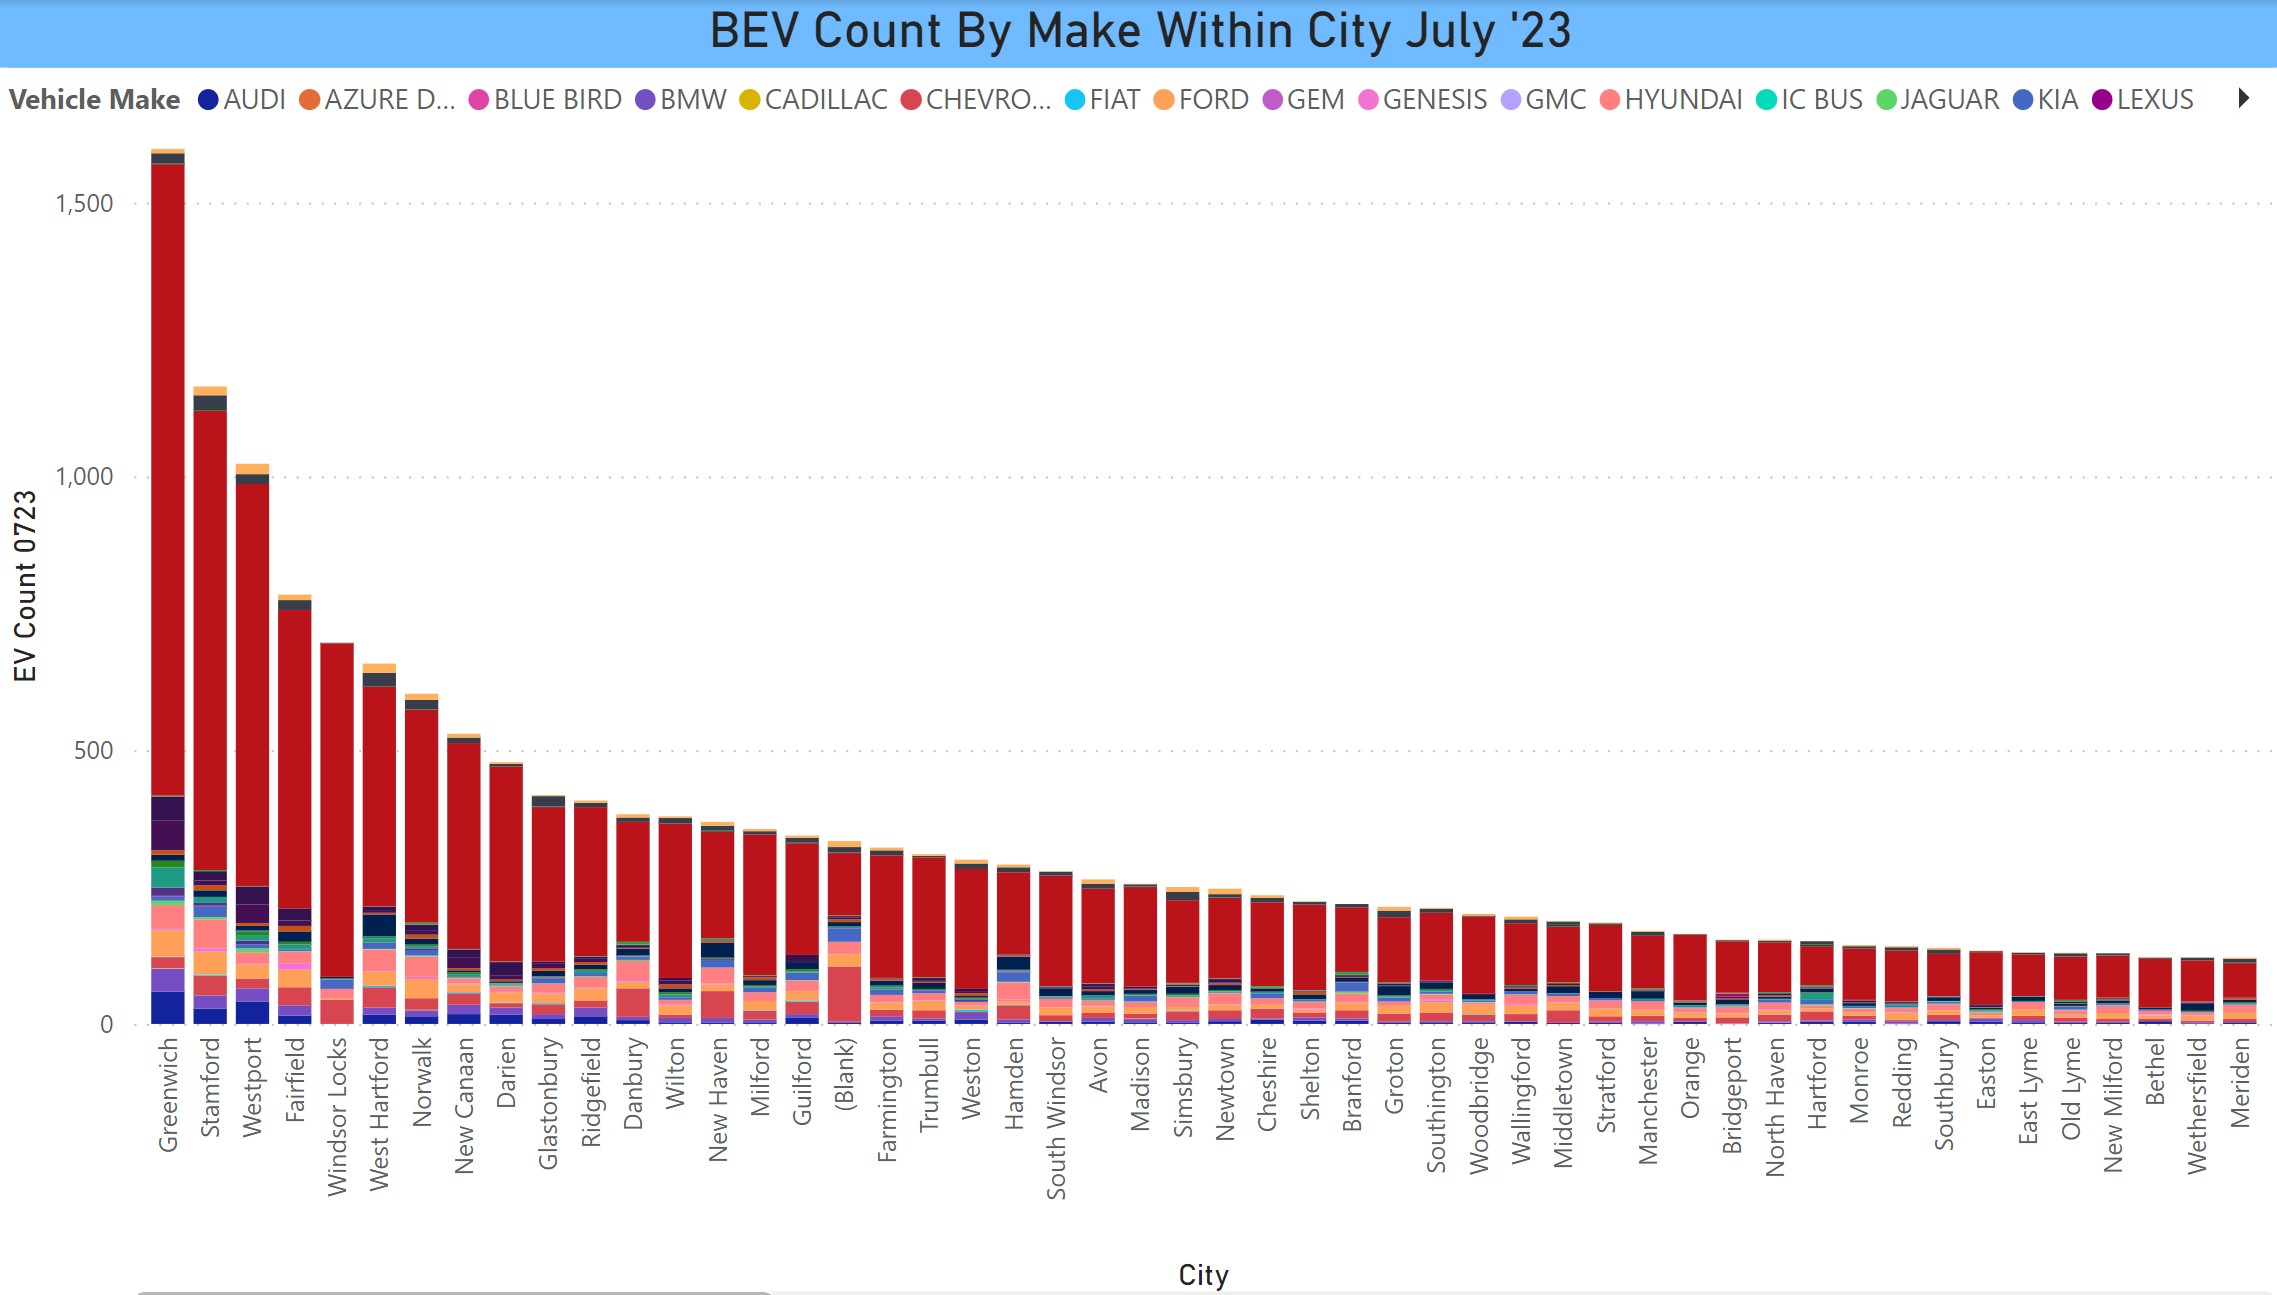 BEV Count by Make Within City July 2023